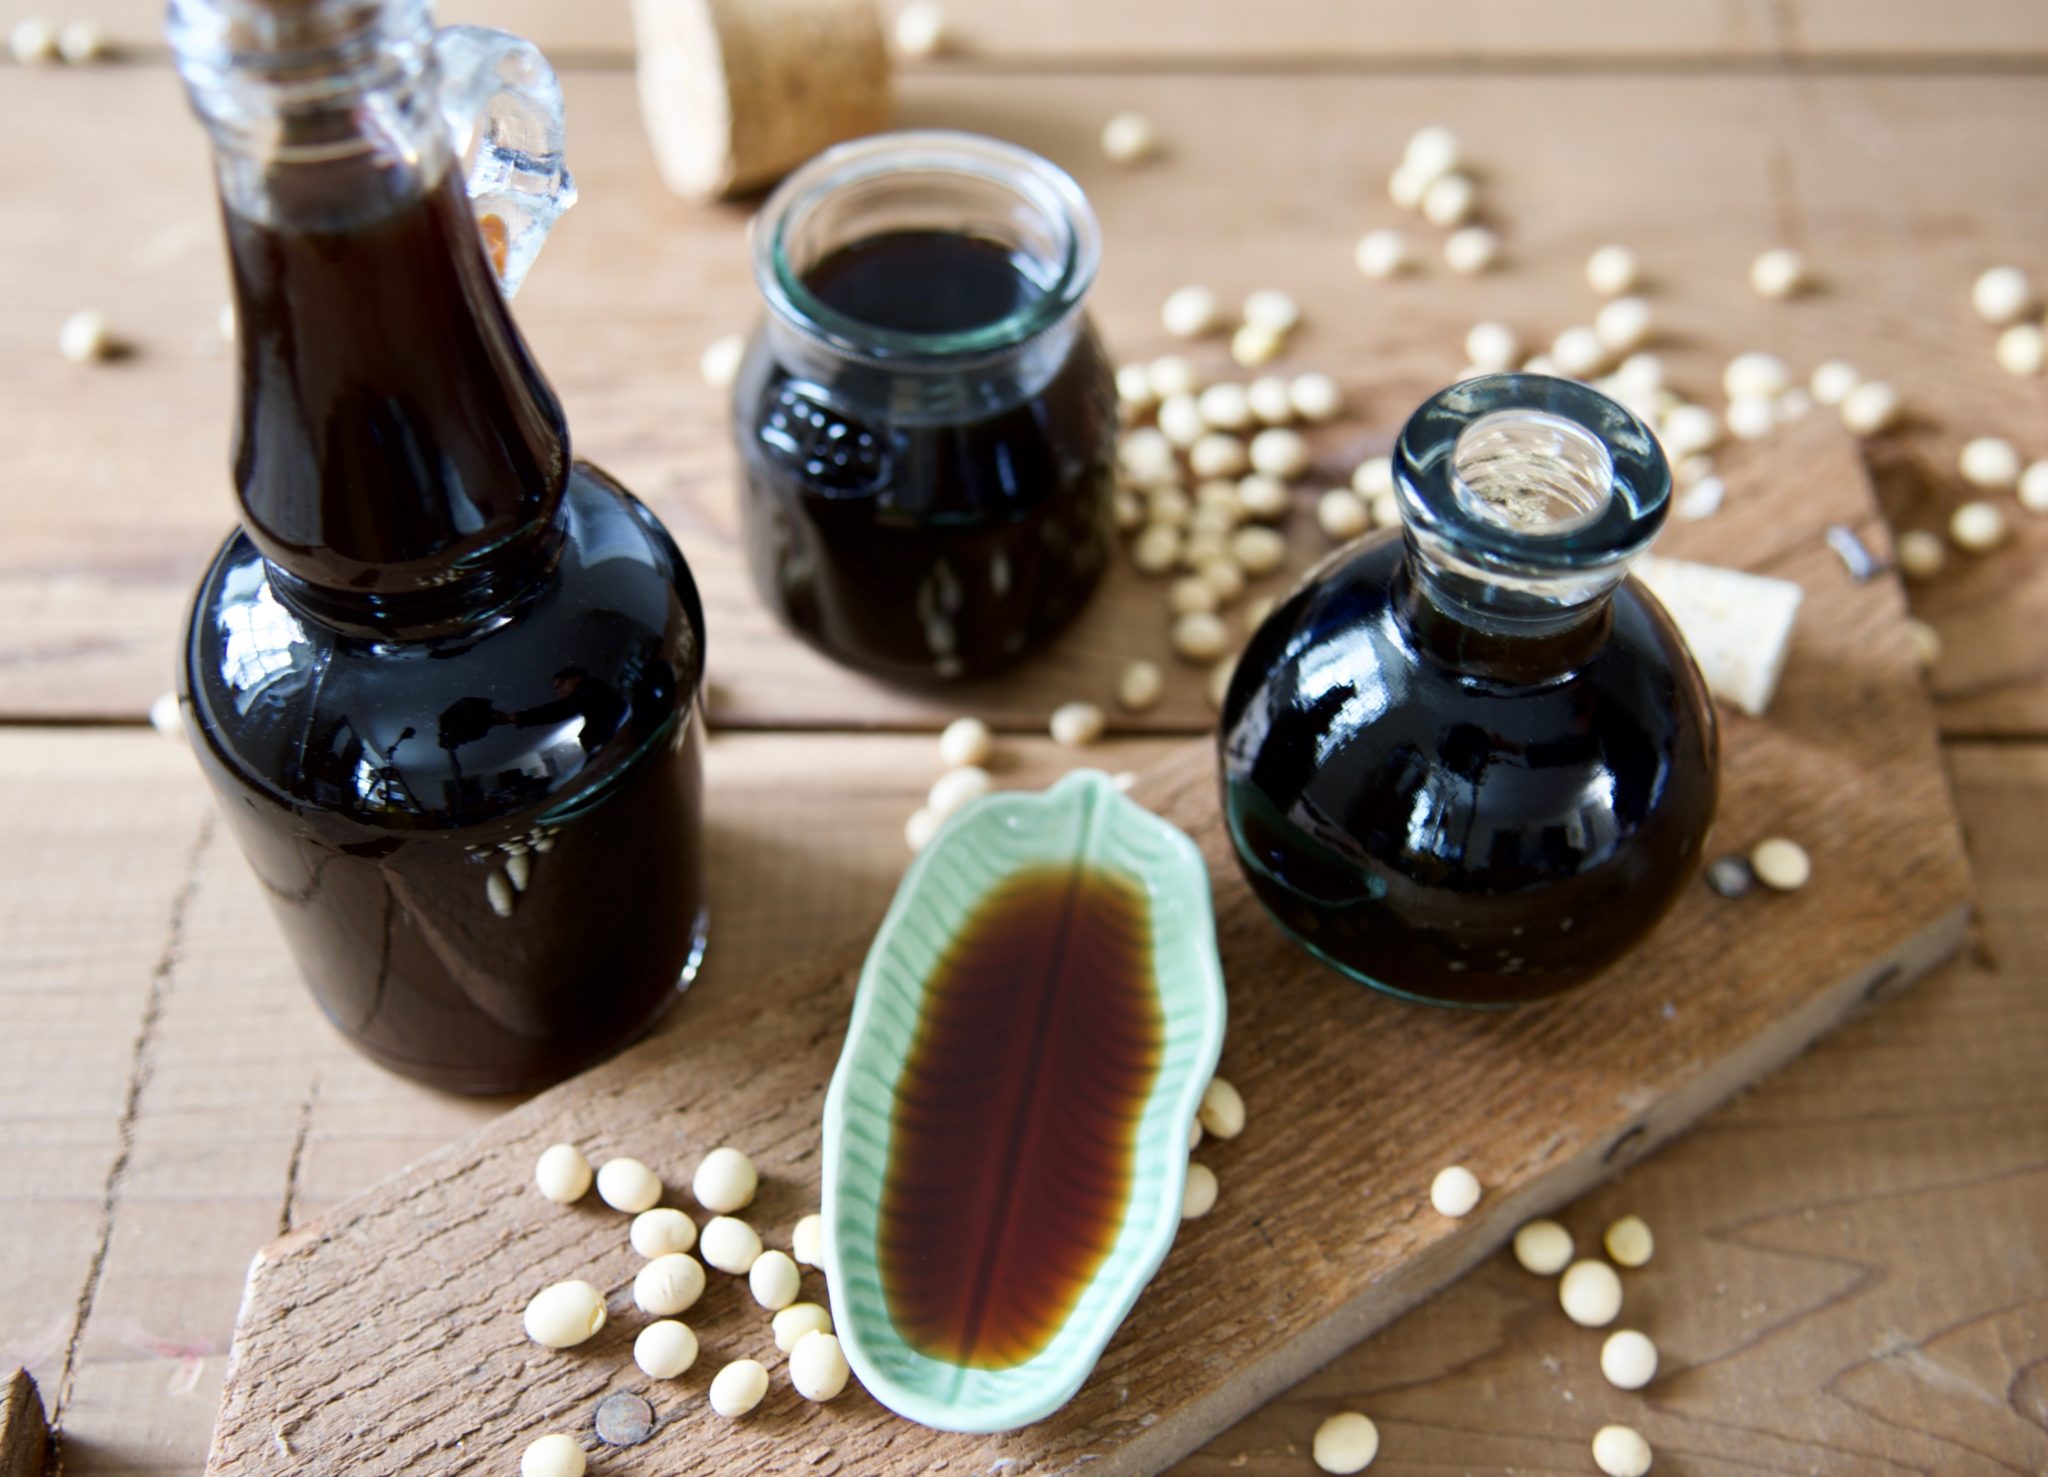 How to Make Soy Sauce at Home (Korean Style from Start to Finish!)